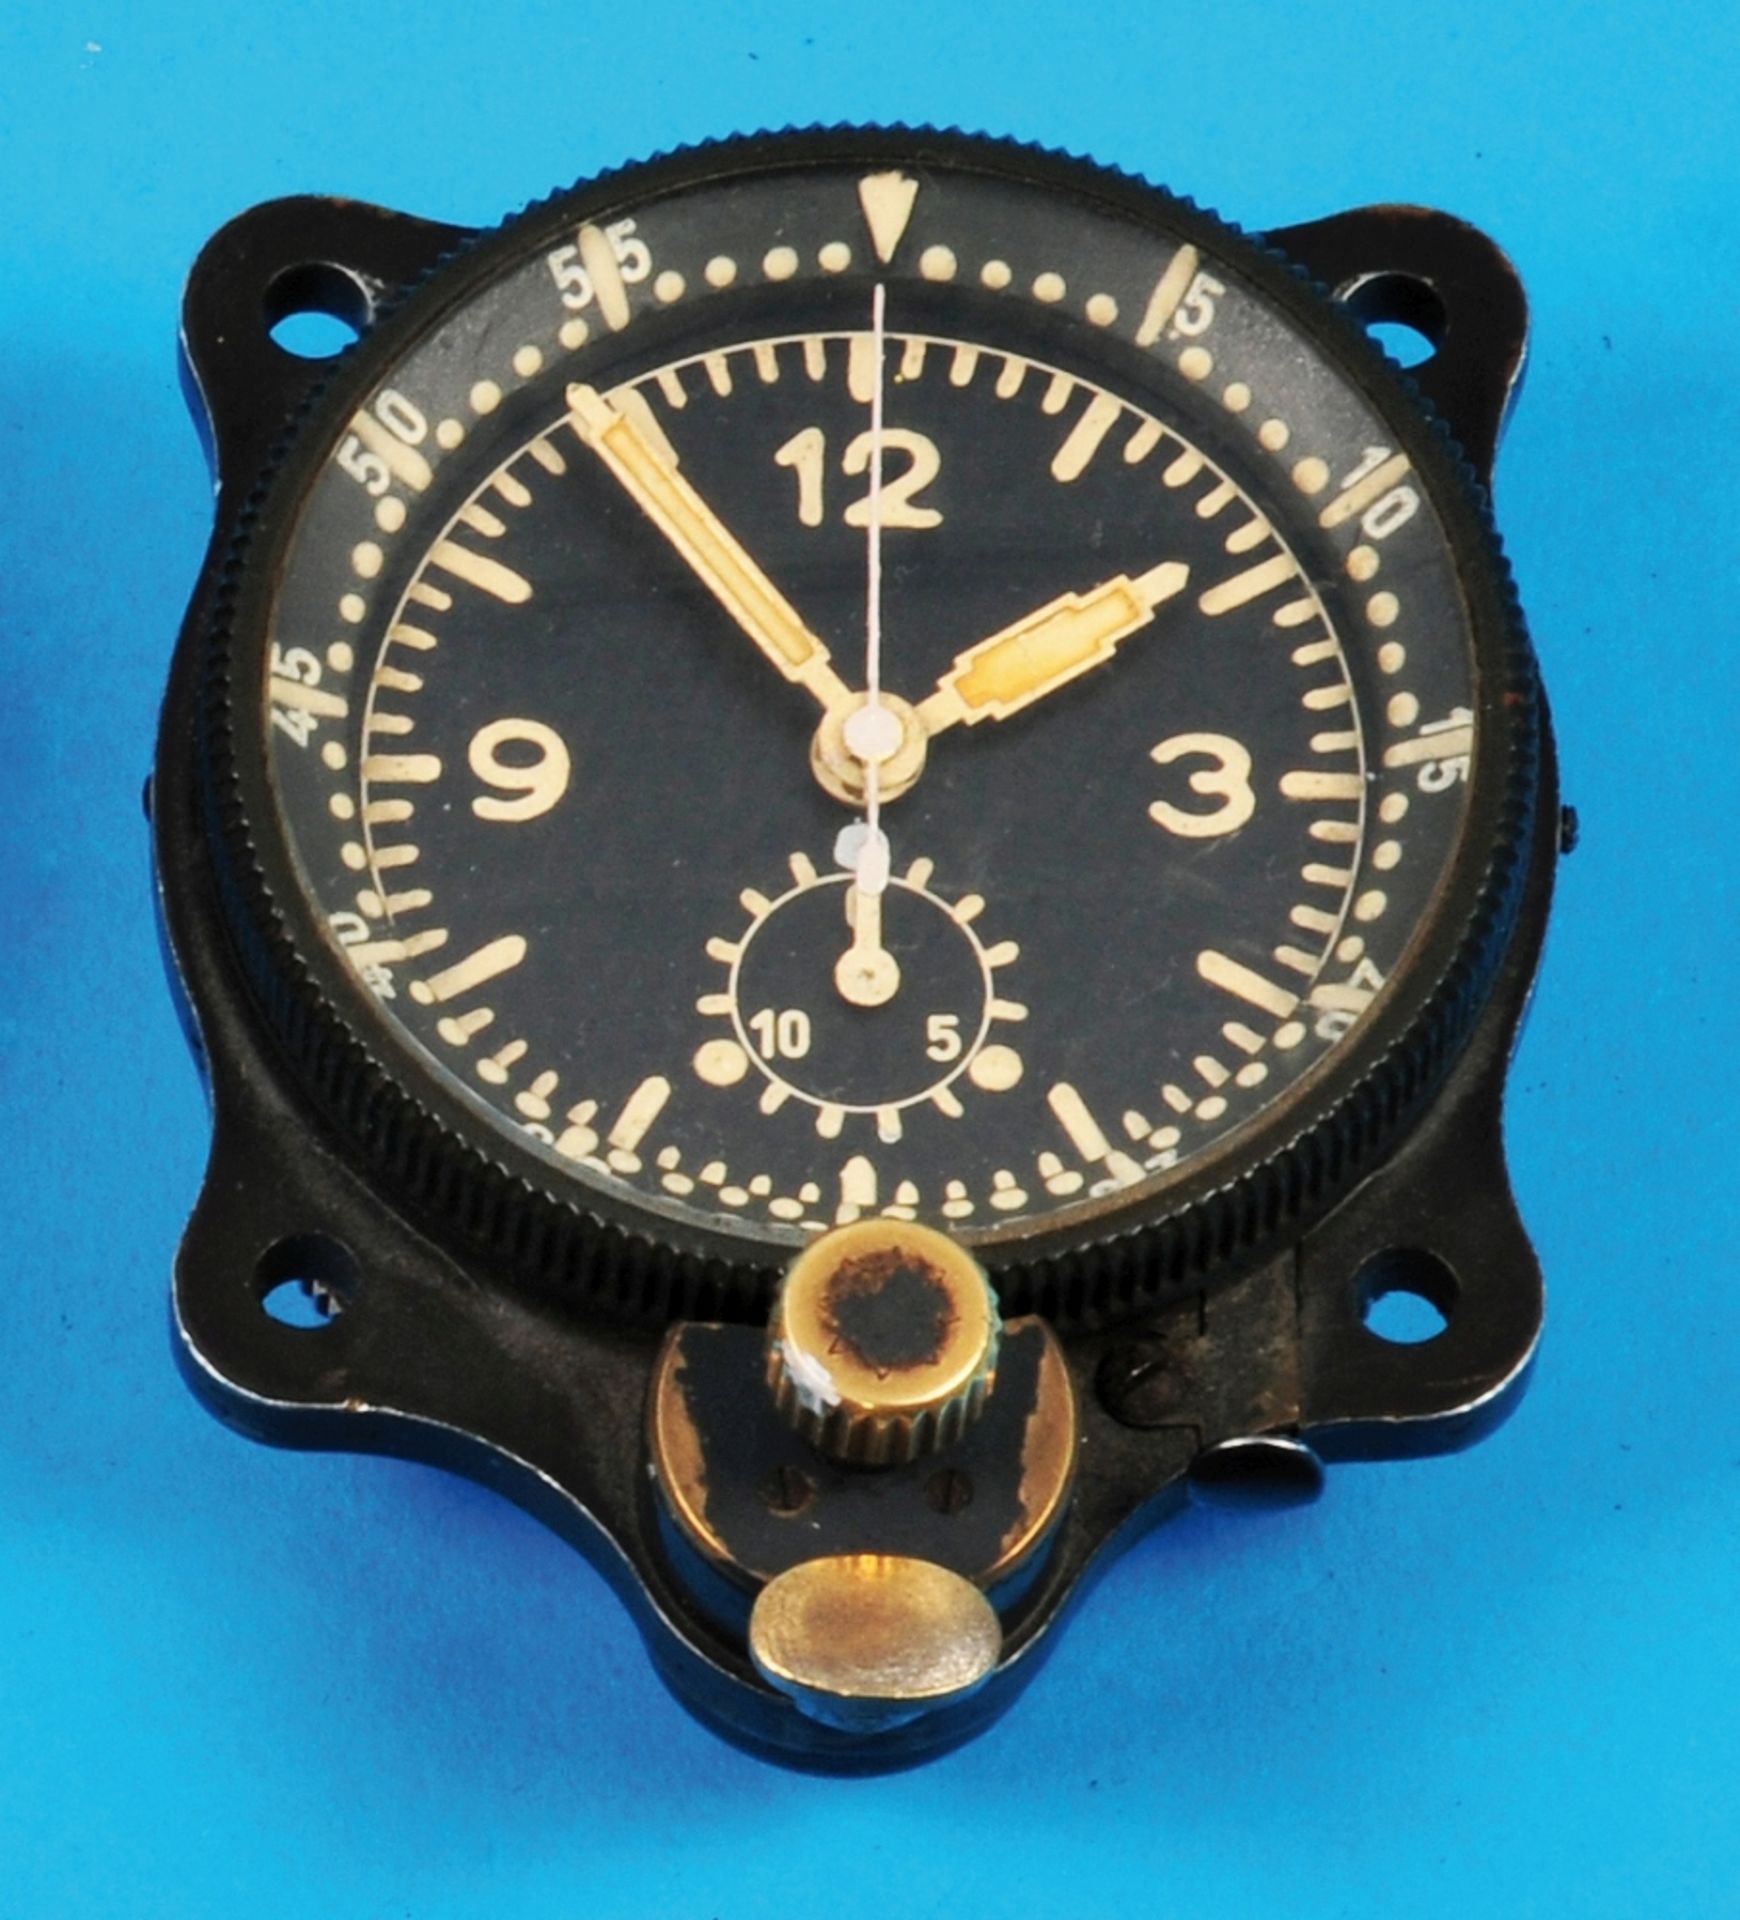 Junghans on-board clock, J30BZ, production period 1932-1945, mostly supplied to the Bayerische Flugz